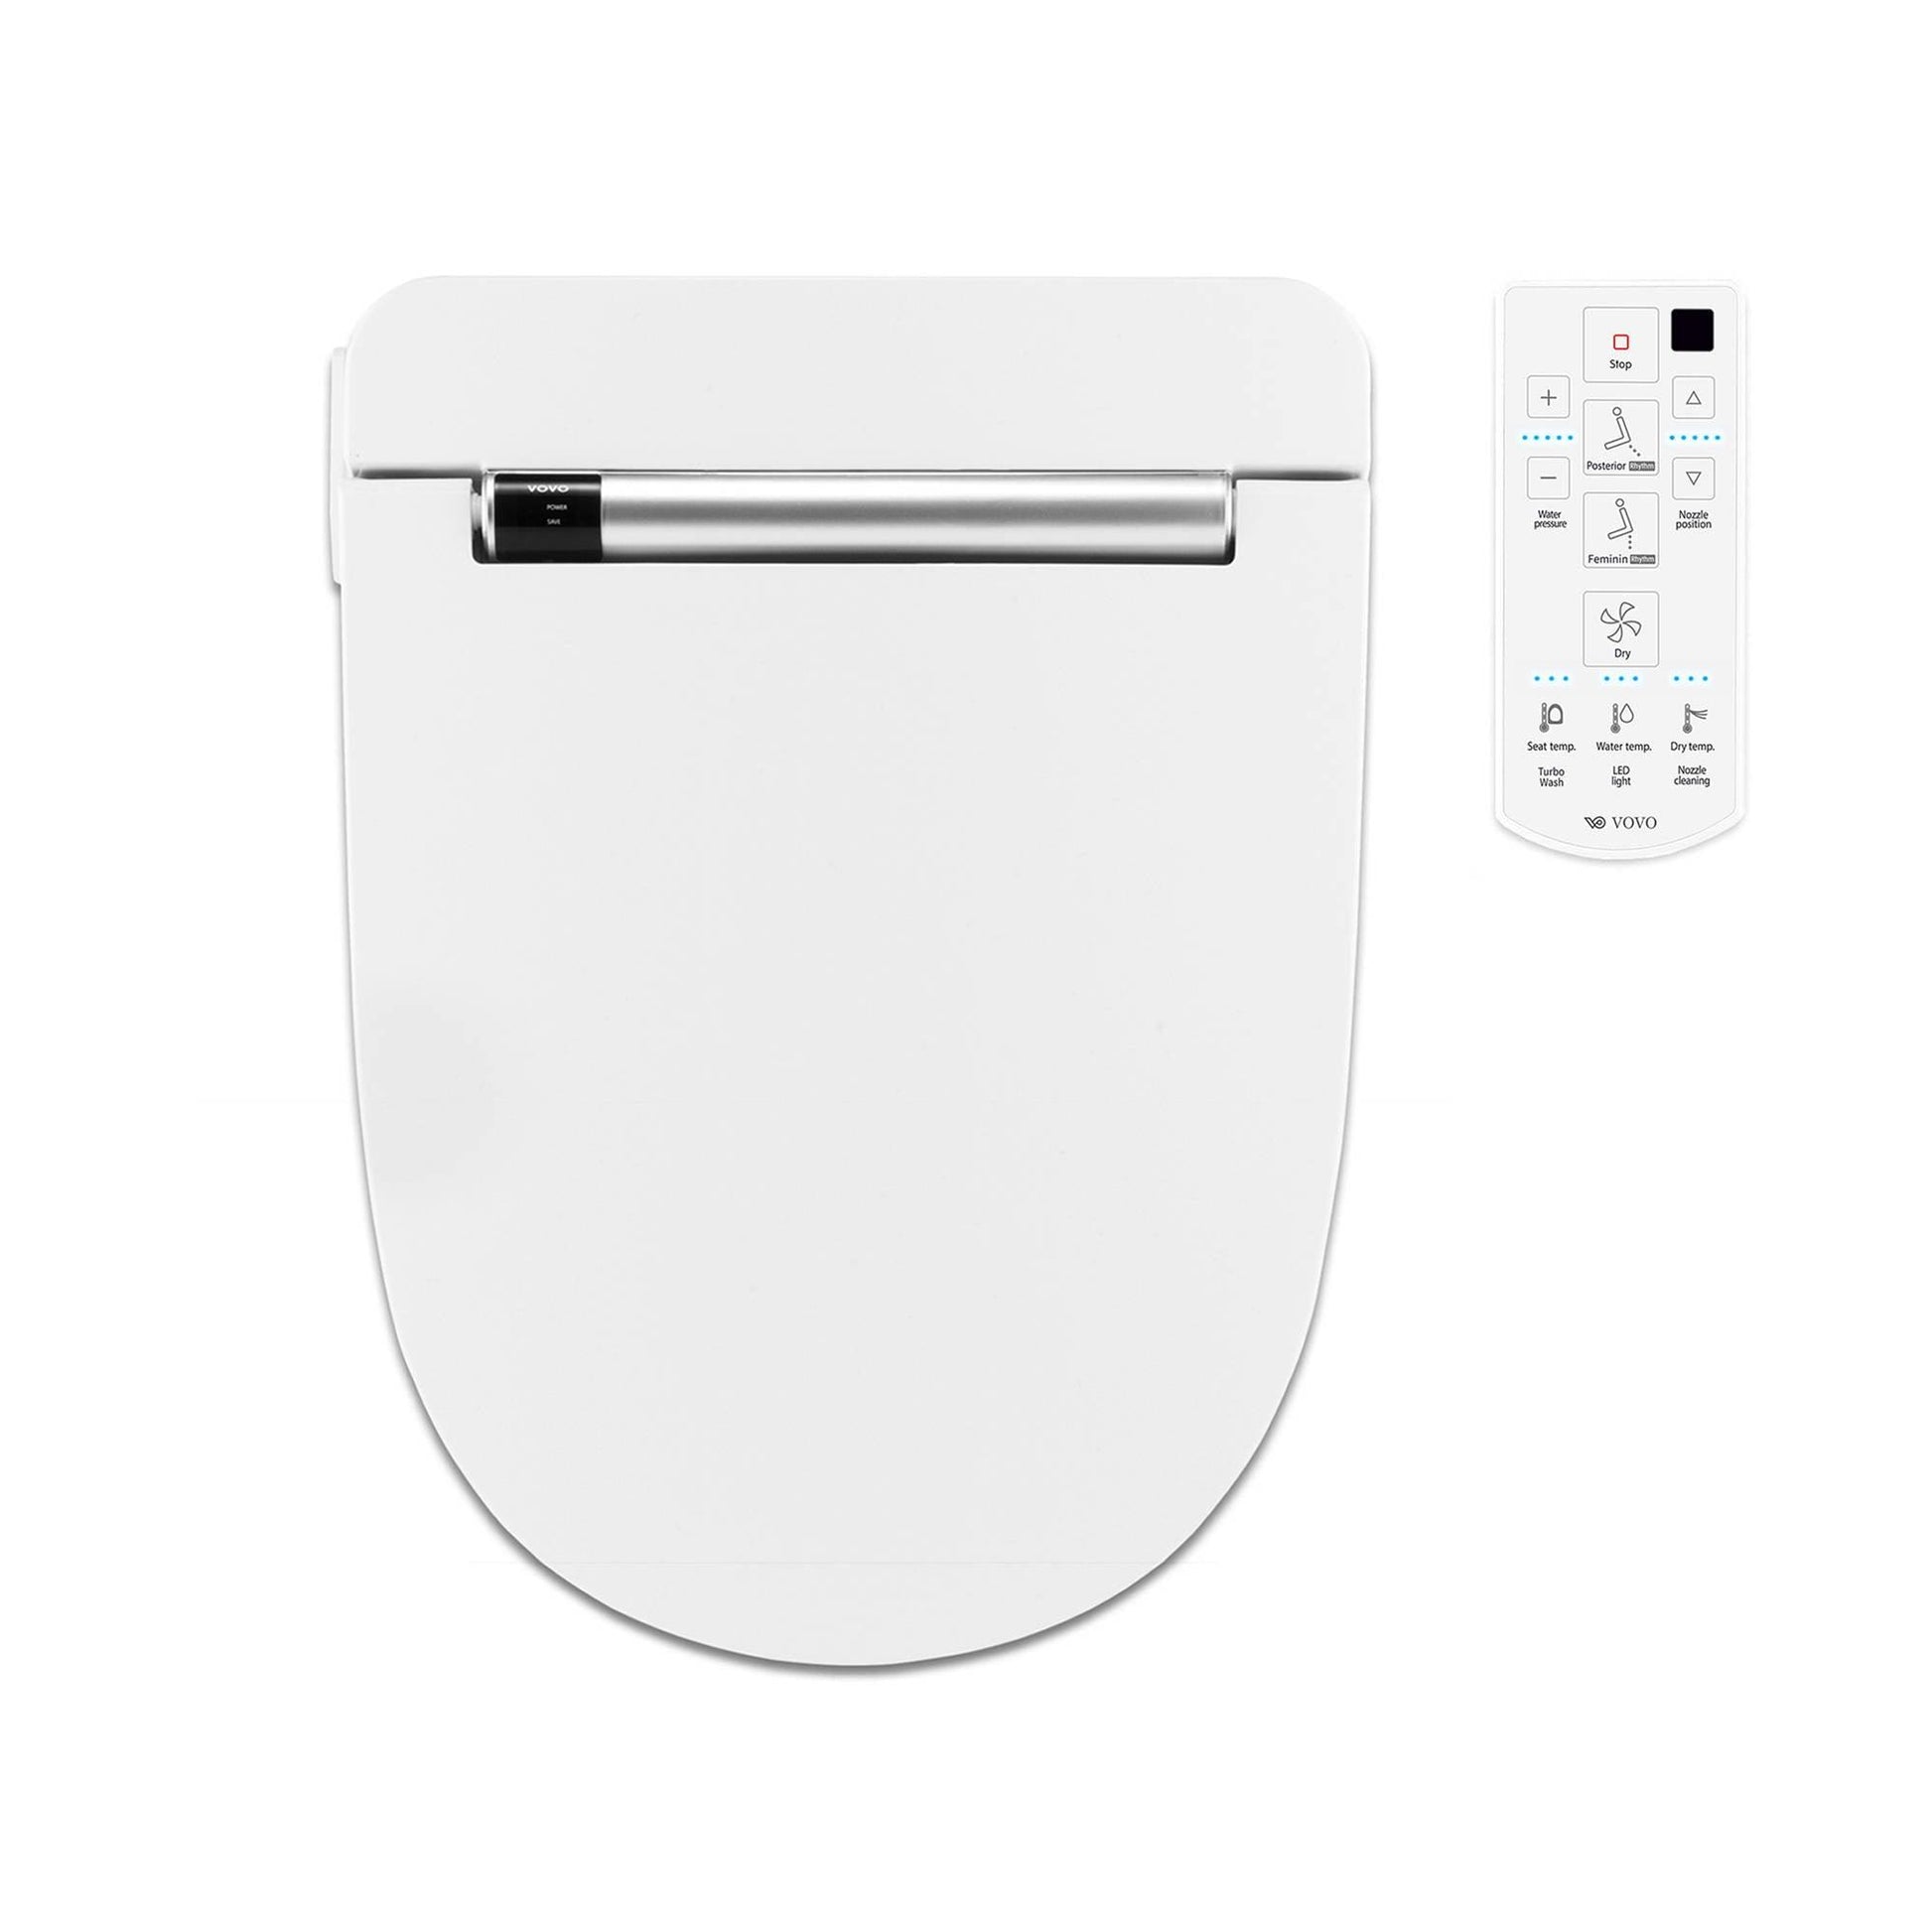 VOVO Electronic Bidet VB-4000S, Made in Korea, LED Nightlight, Deodorization, Full Stainless Nozzle,Heated Seat,Warm Dry and Water - YOURISHOP.COM